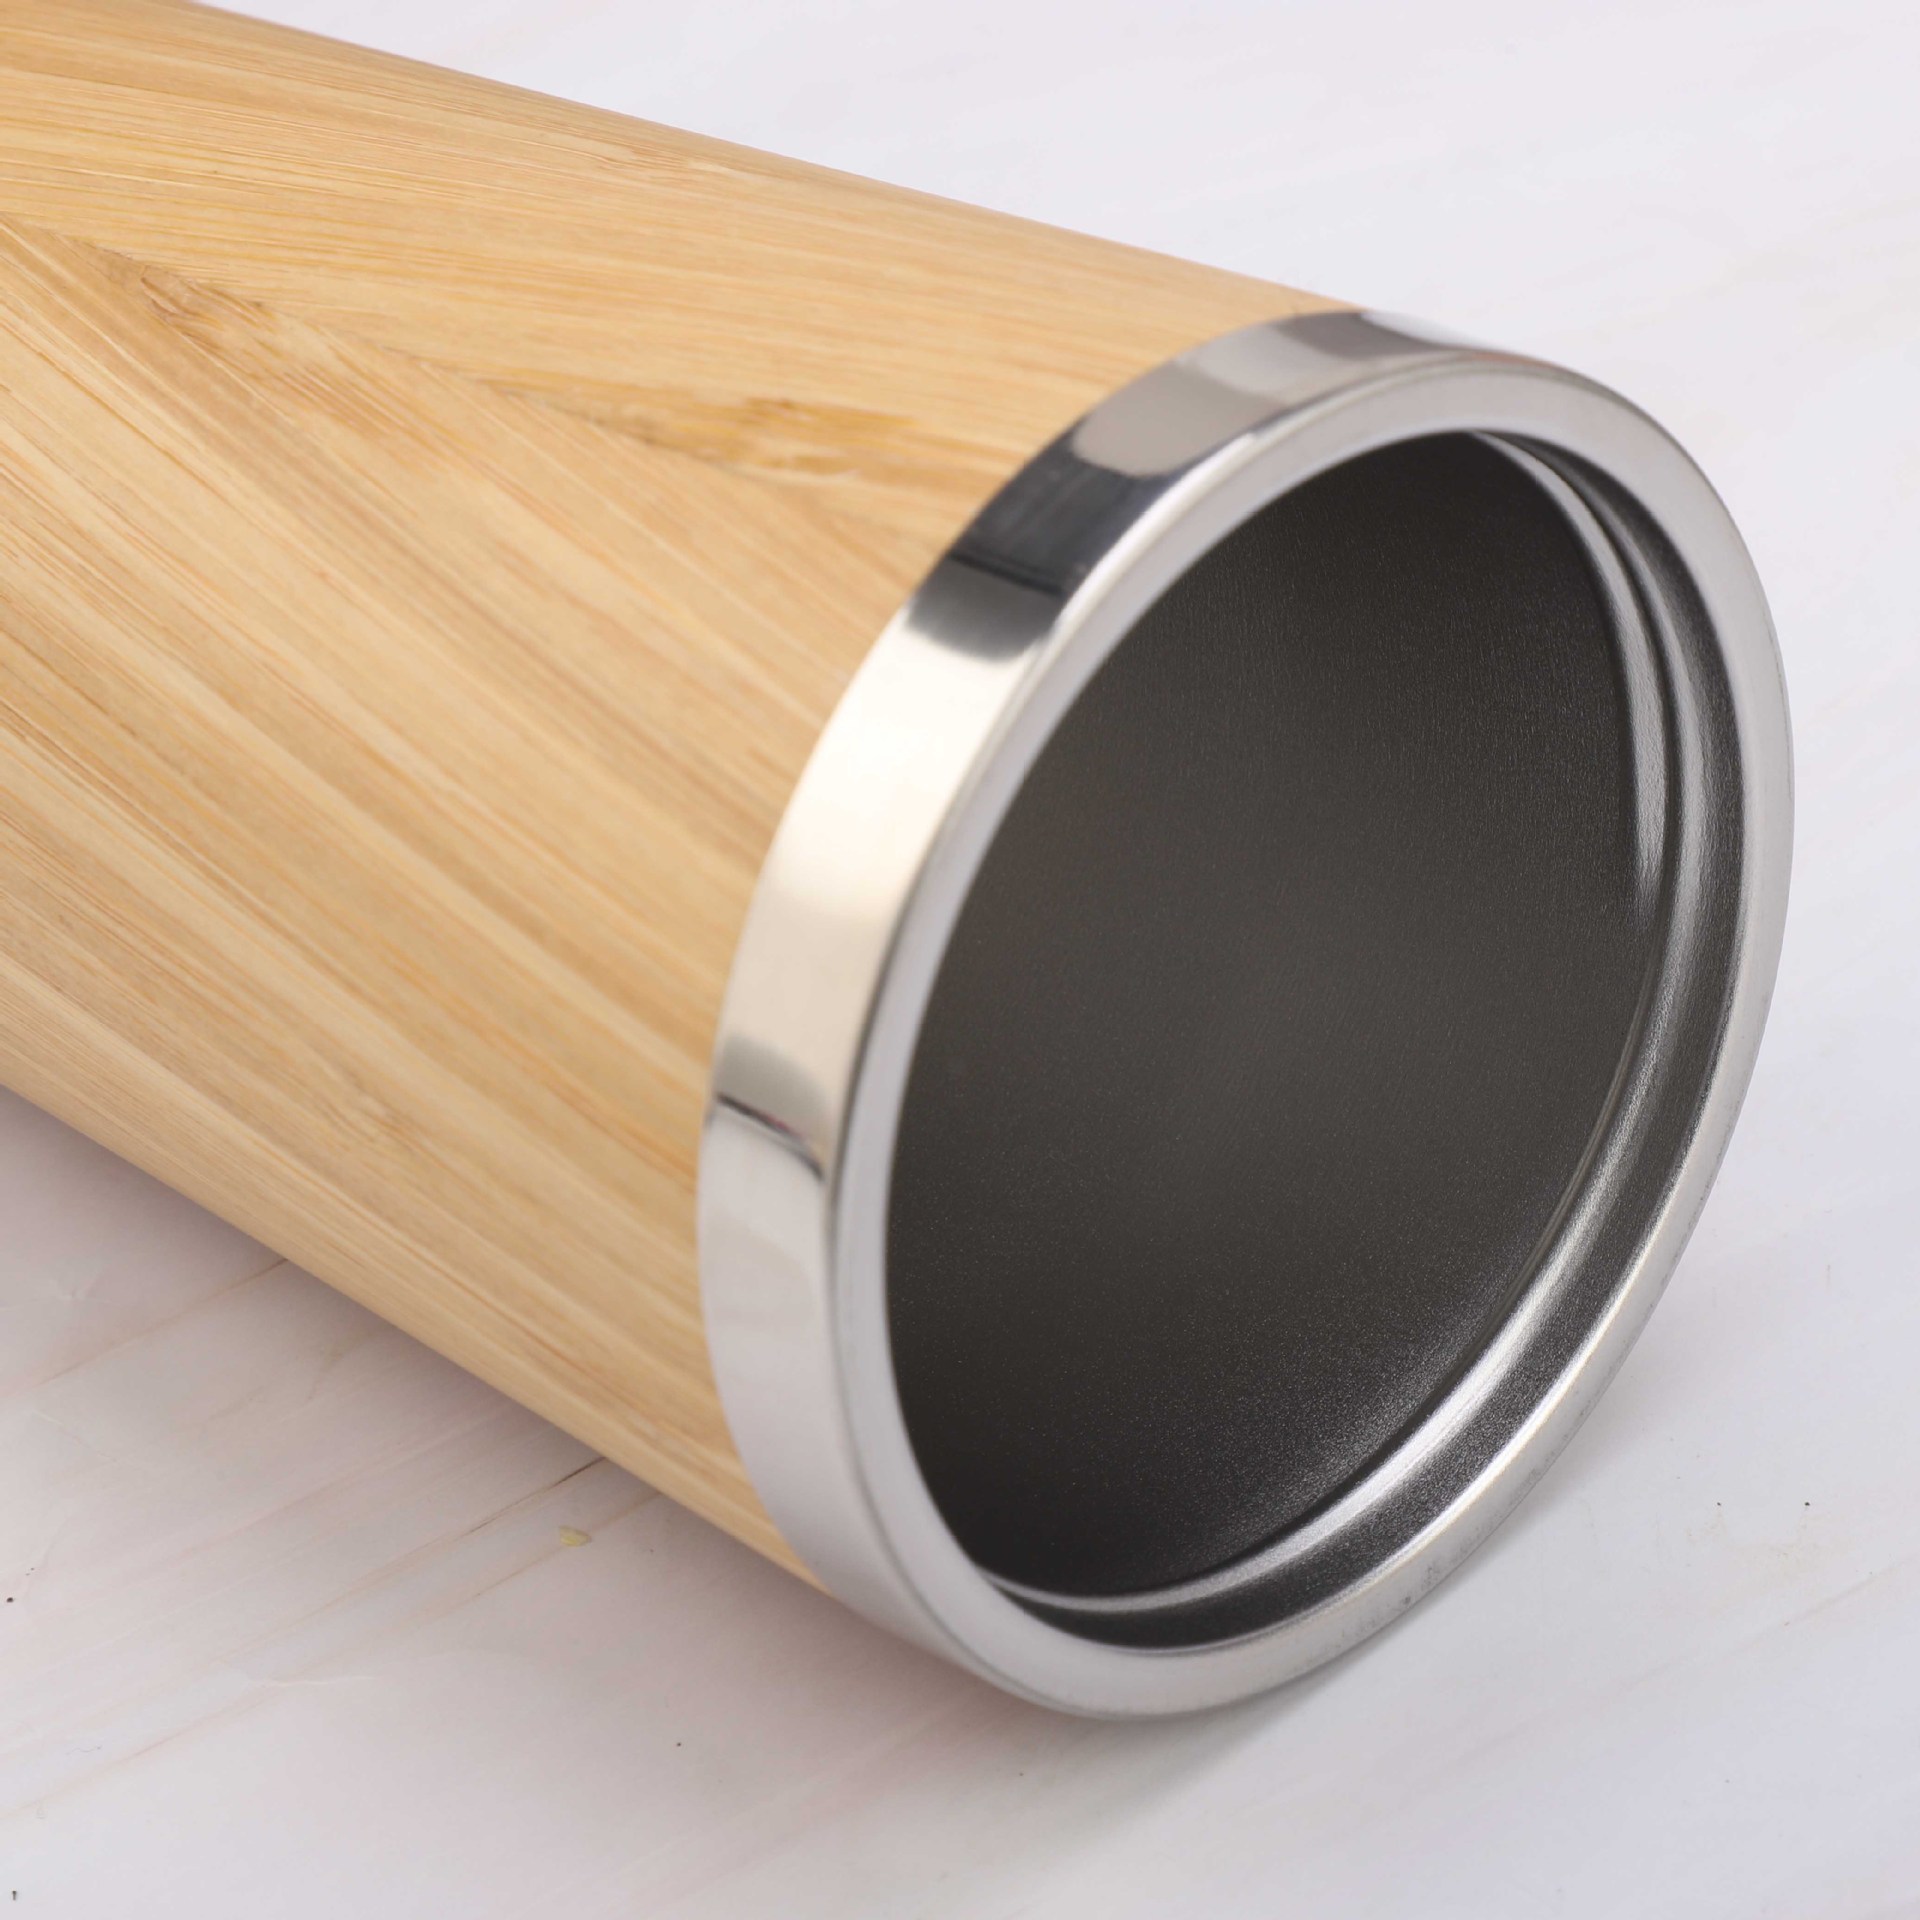 New 304 stainless steel thermos cup double bamboo shell car coffee cup home office business gift cup 450ml YYGM-36